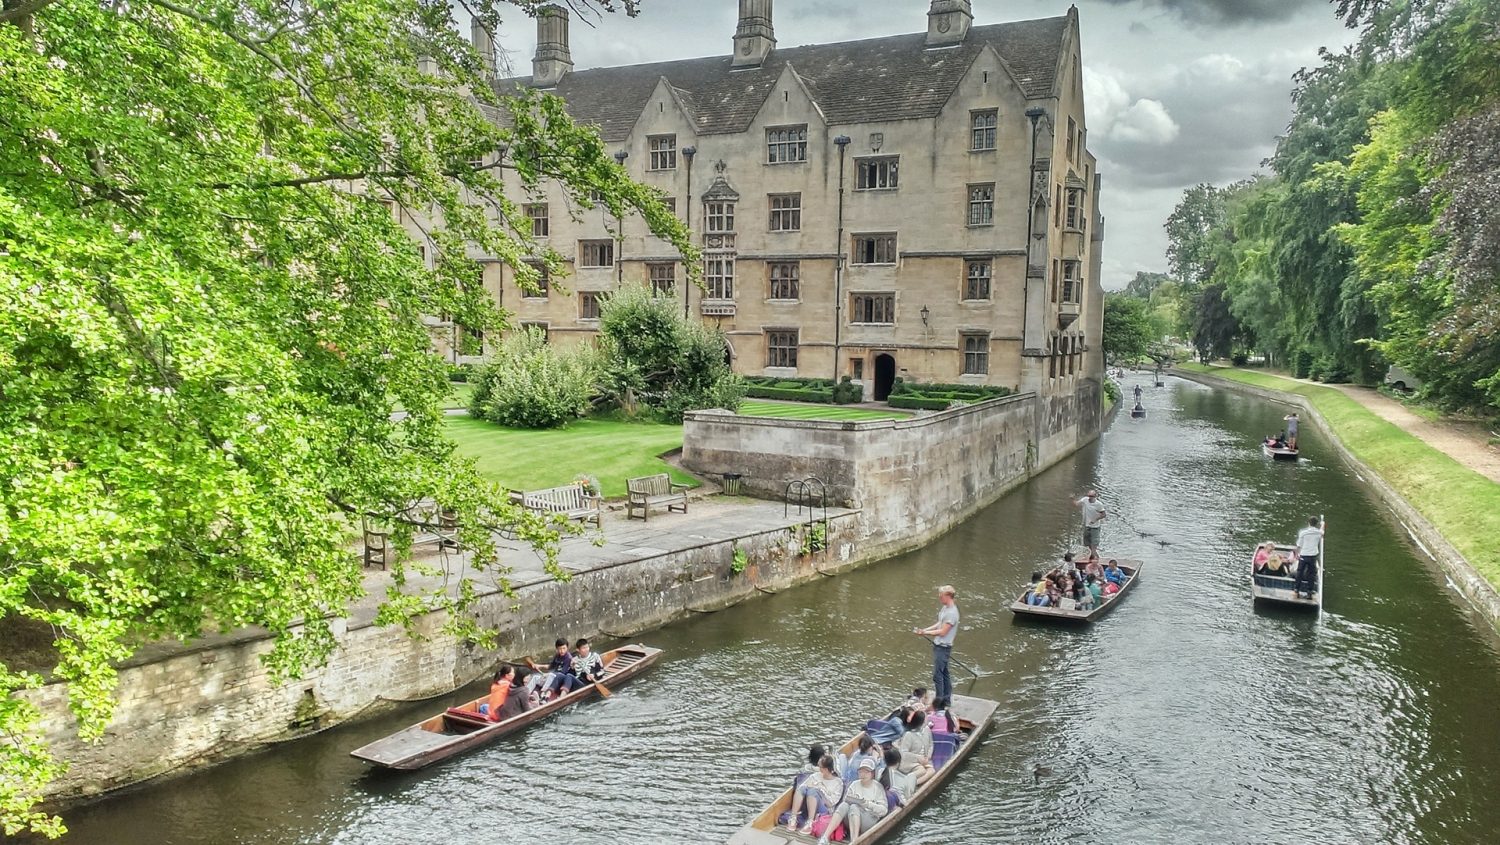 Cambridge- TOP 51 DESTINATIONS TO VISIT IN 2019 FOR INDIANS